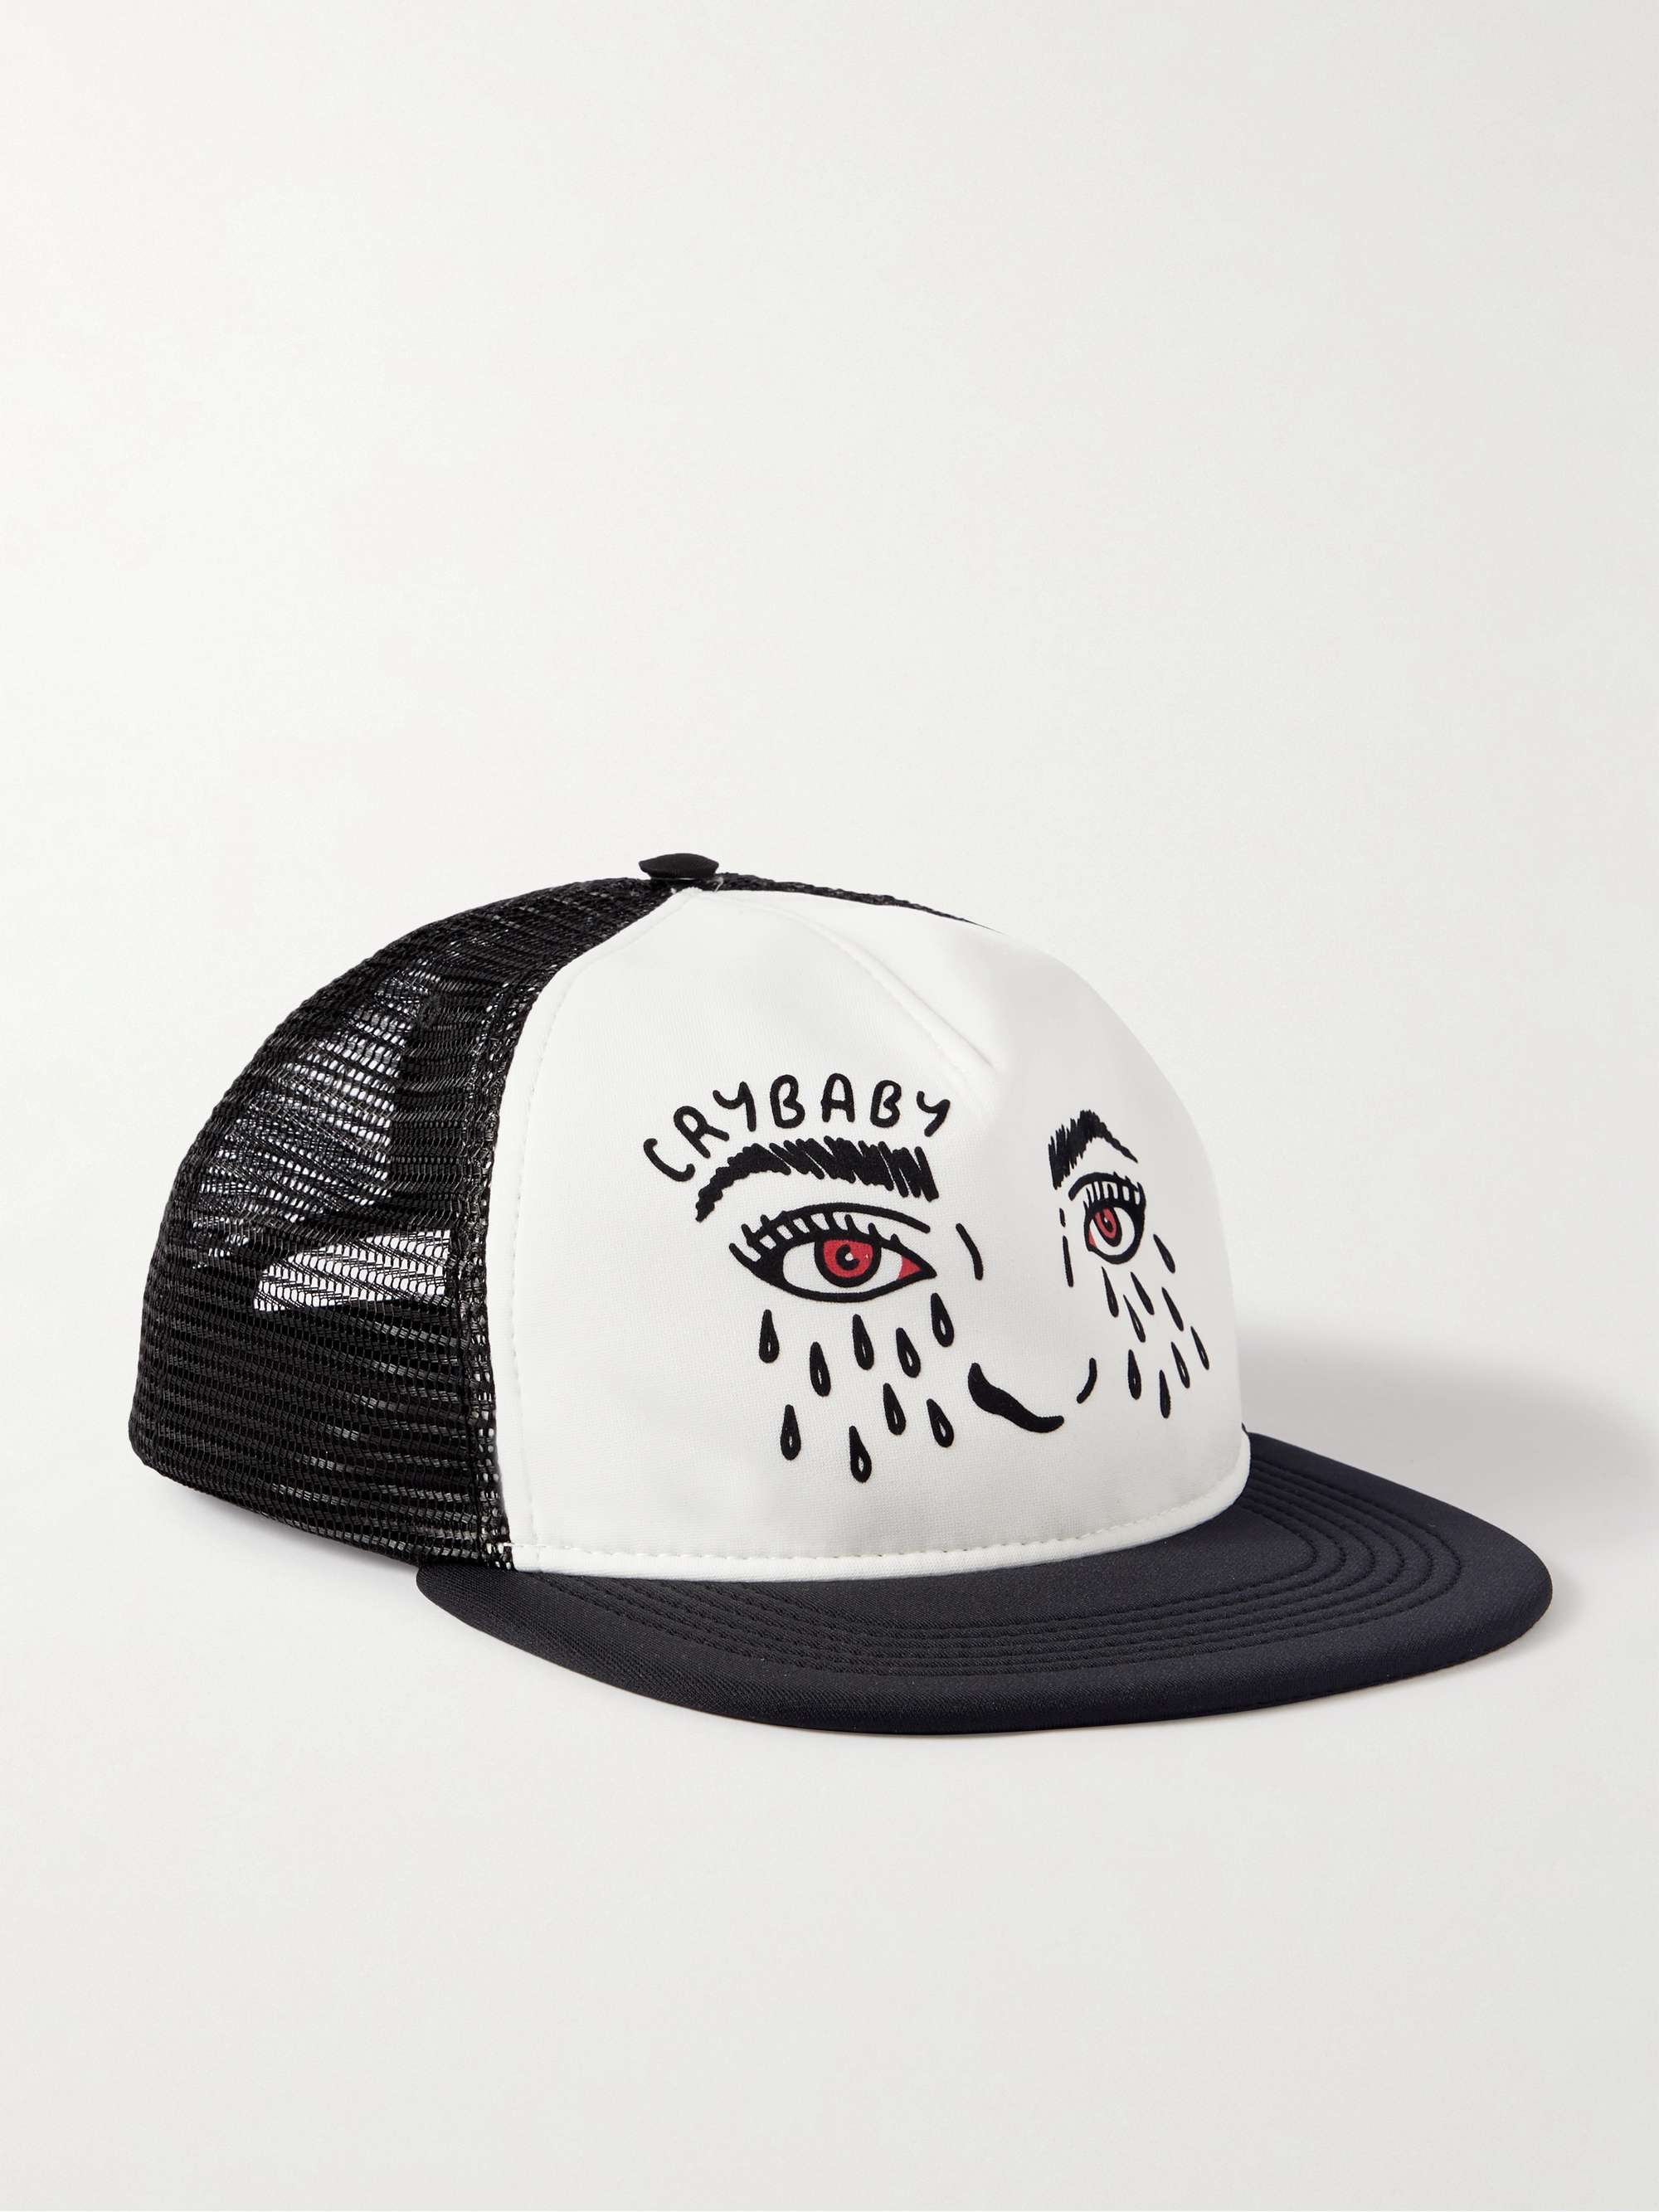 CELINE HOMME Cry Baby Printed Twill and Mesh Trucker Hat